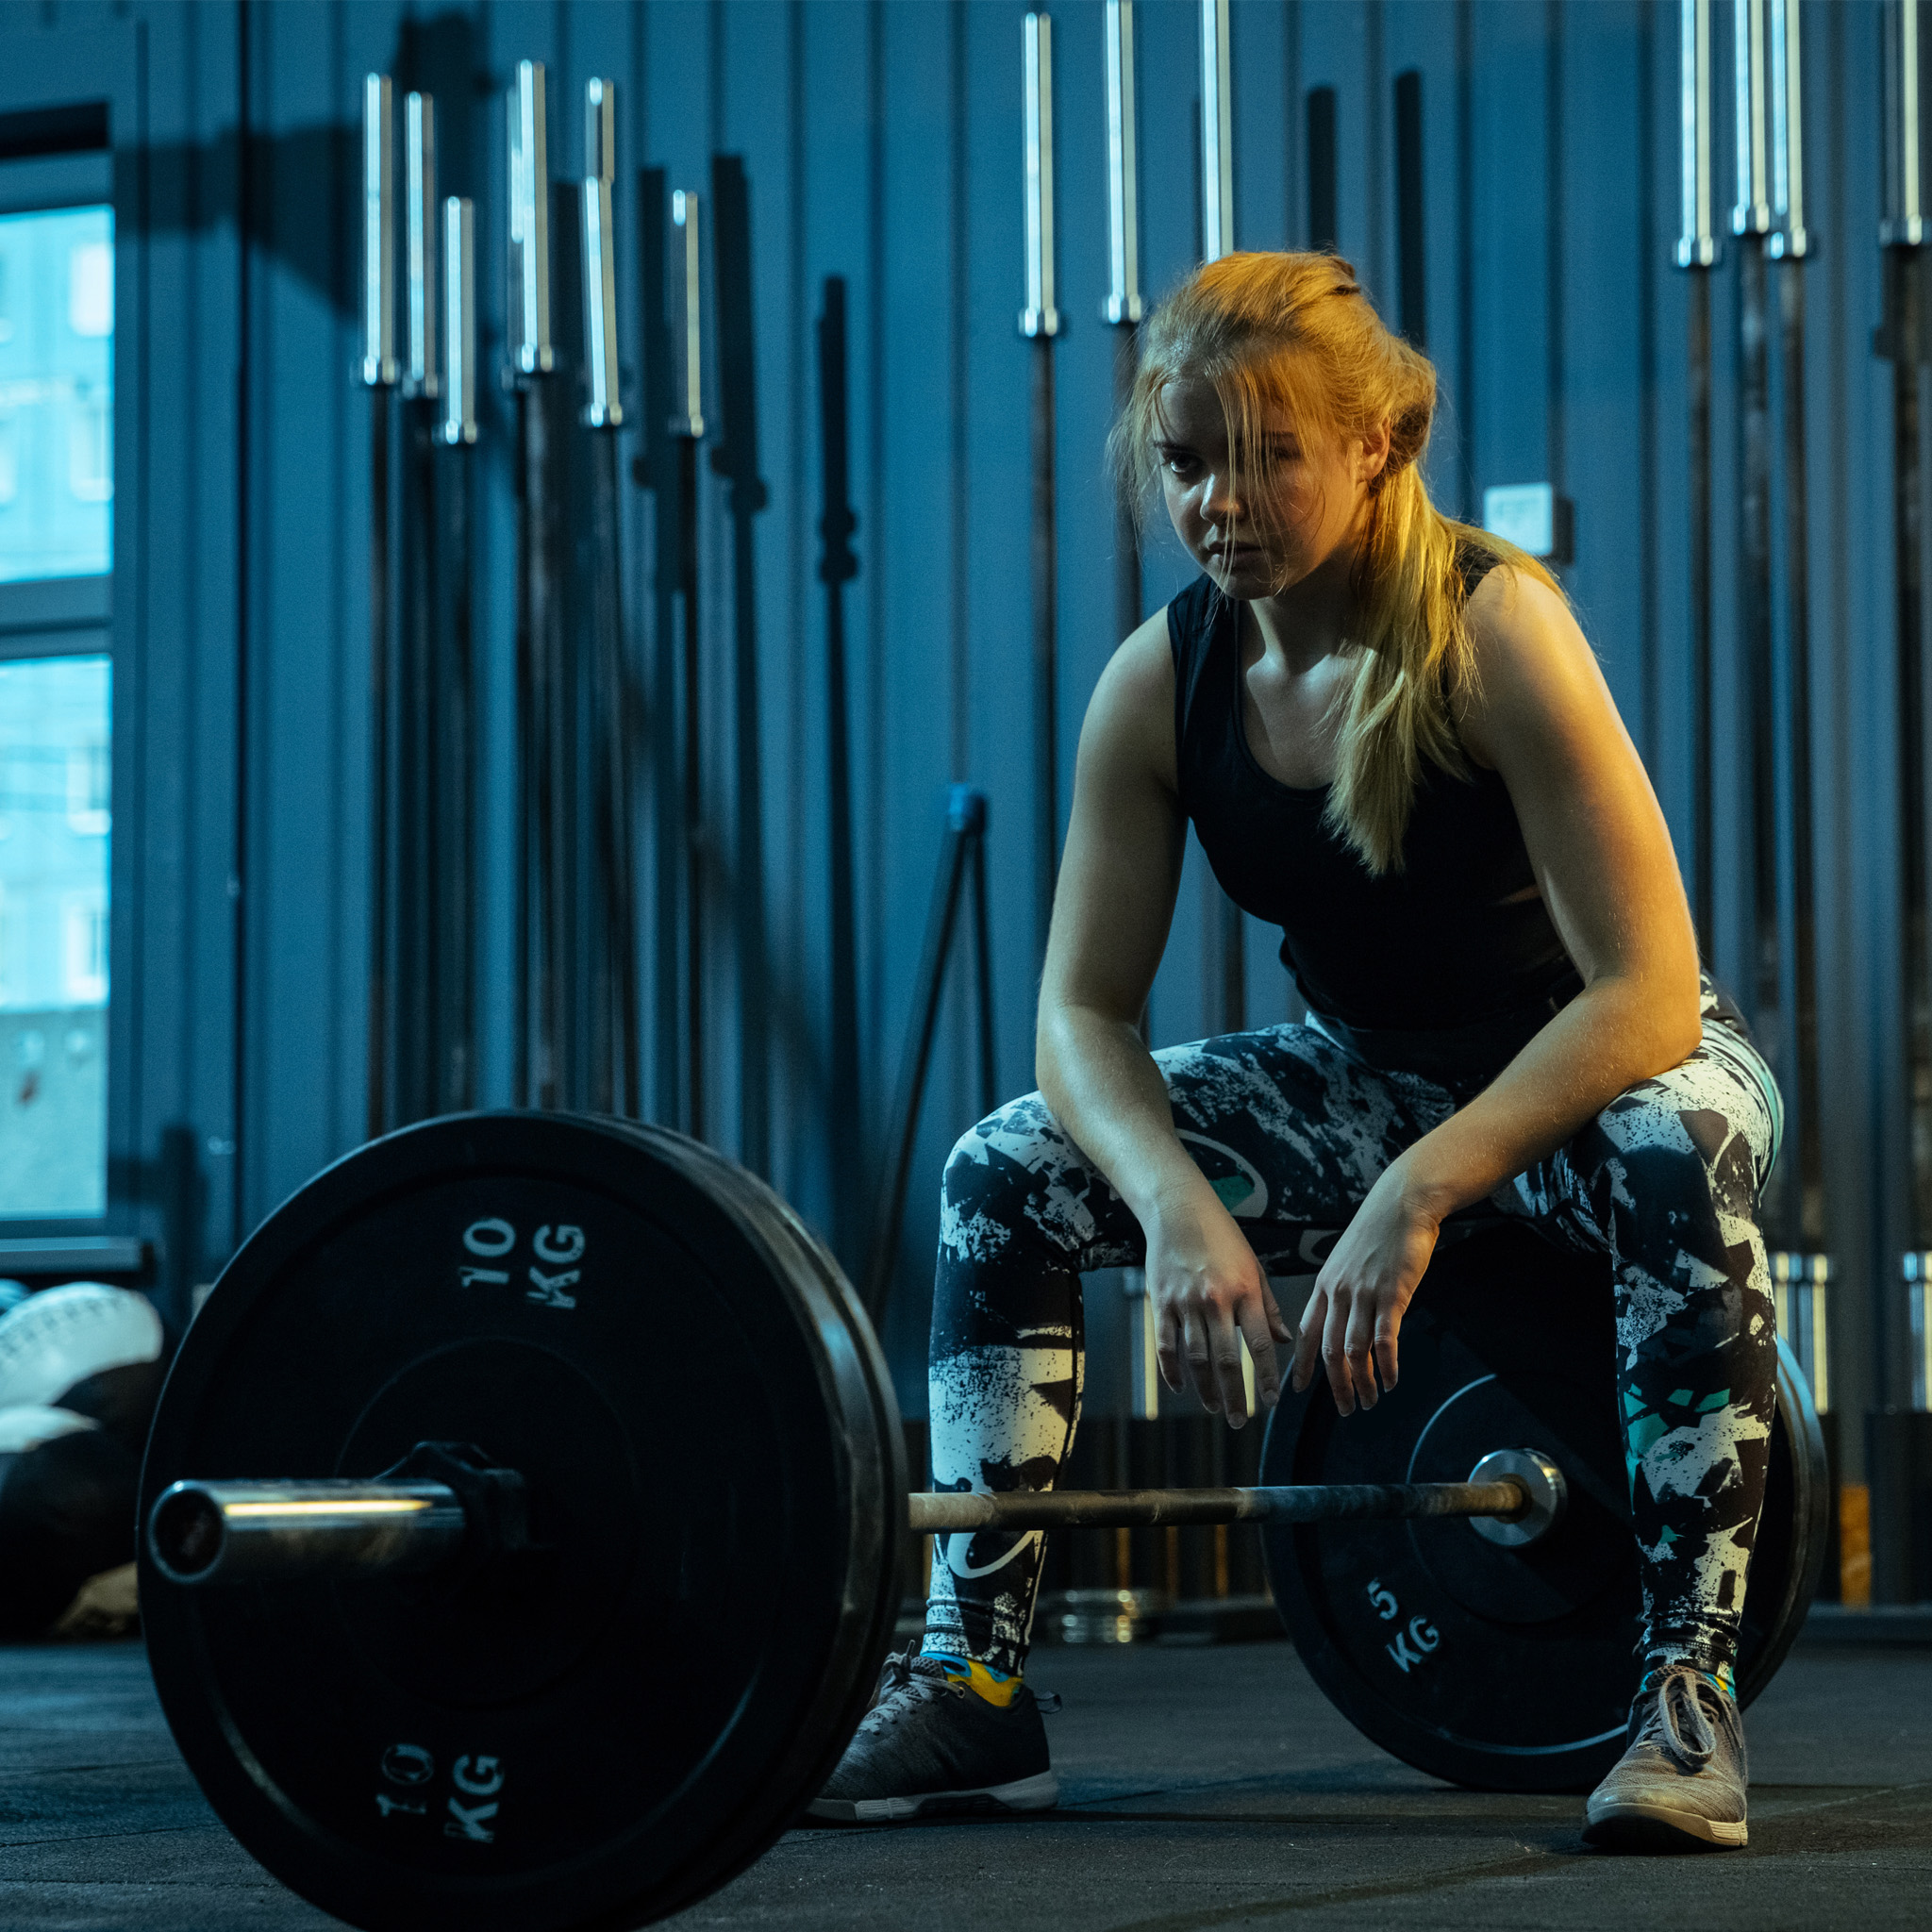 Caucasian teenage girl practicing in weightlifting in gym. Female sportive model posing before training with barbell, looks confident. Body building, healthy lifestyle, movement and action concept.